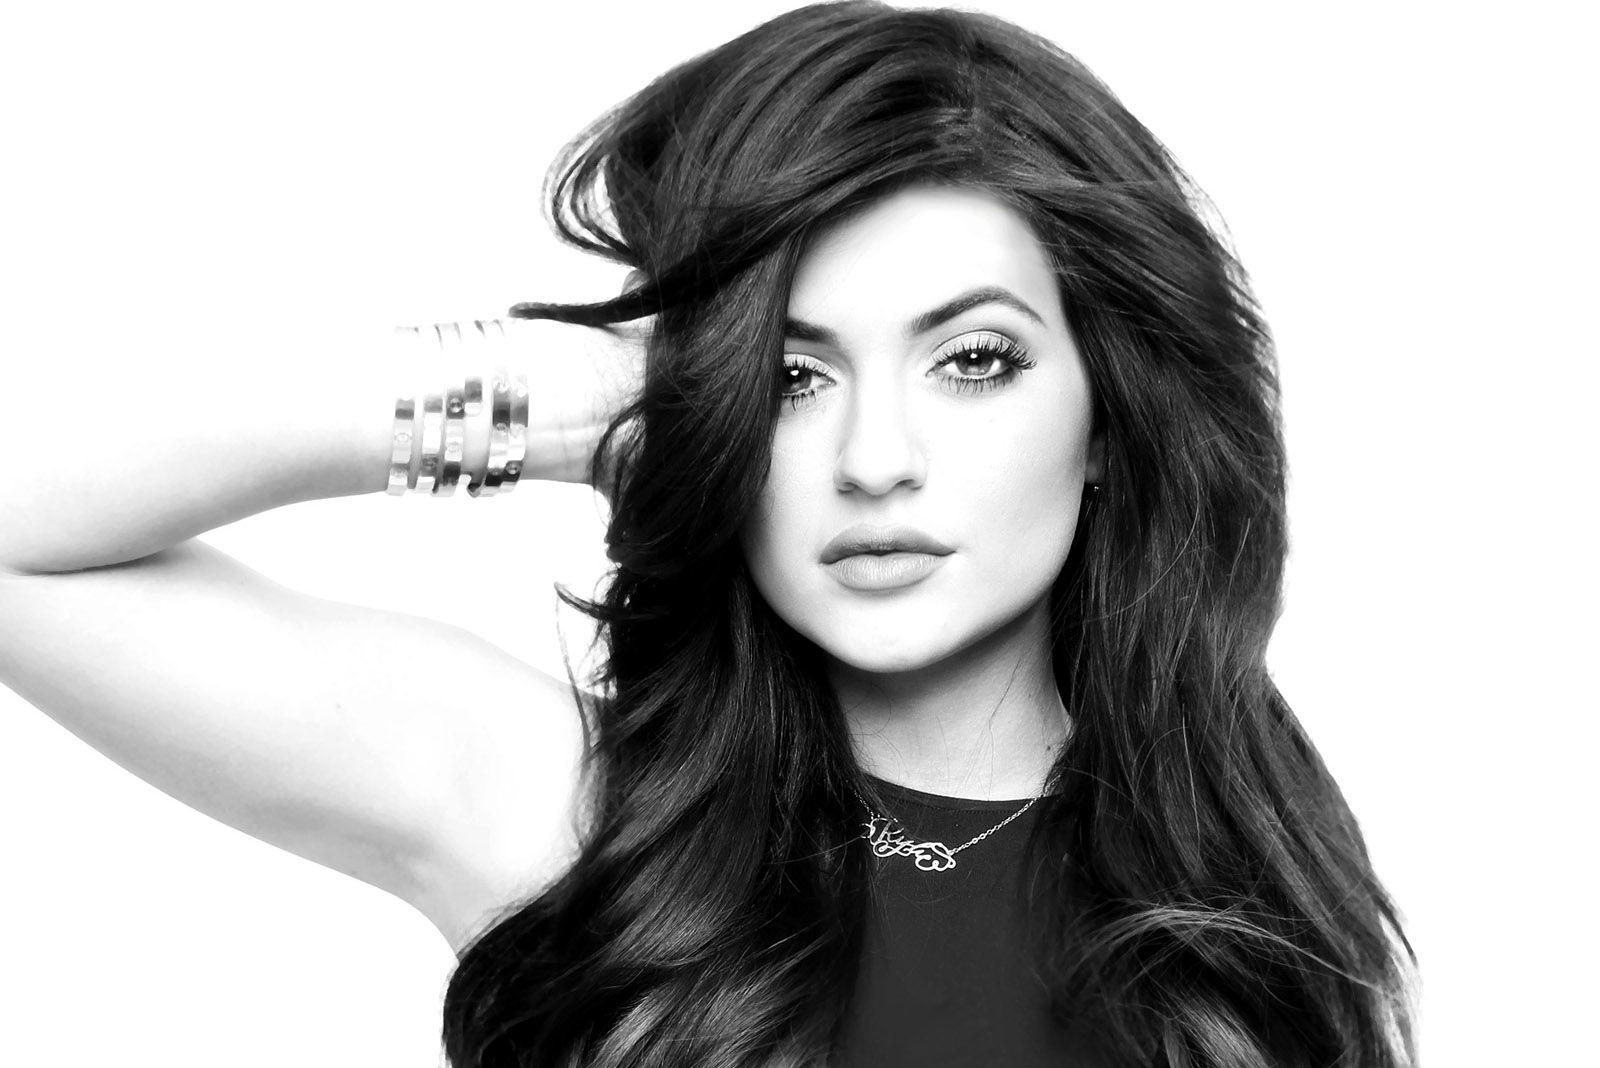 Kylie Jenner Wallpapers Descargar New 66 HD Images & Latest Pics